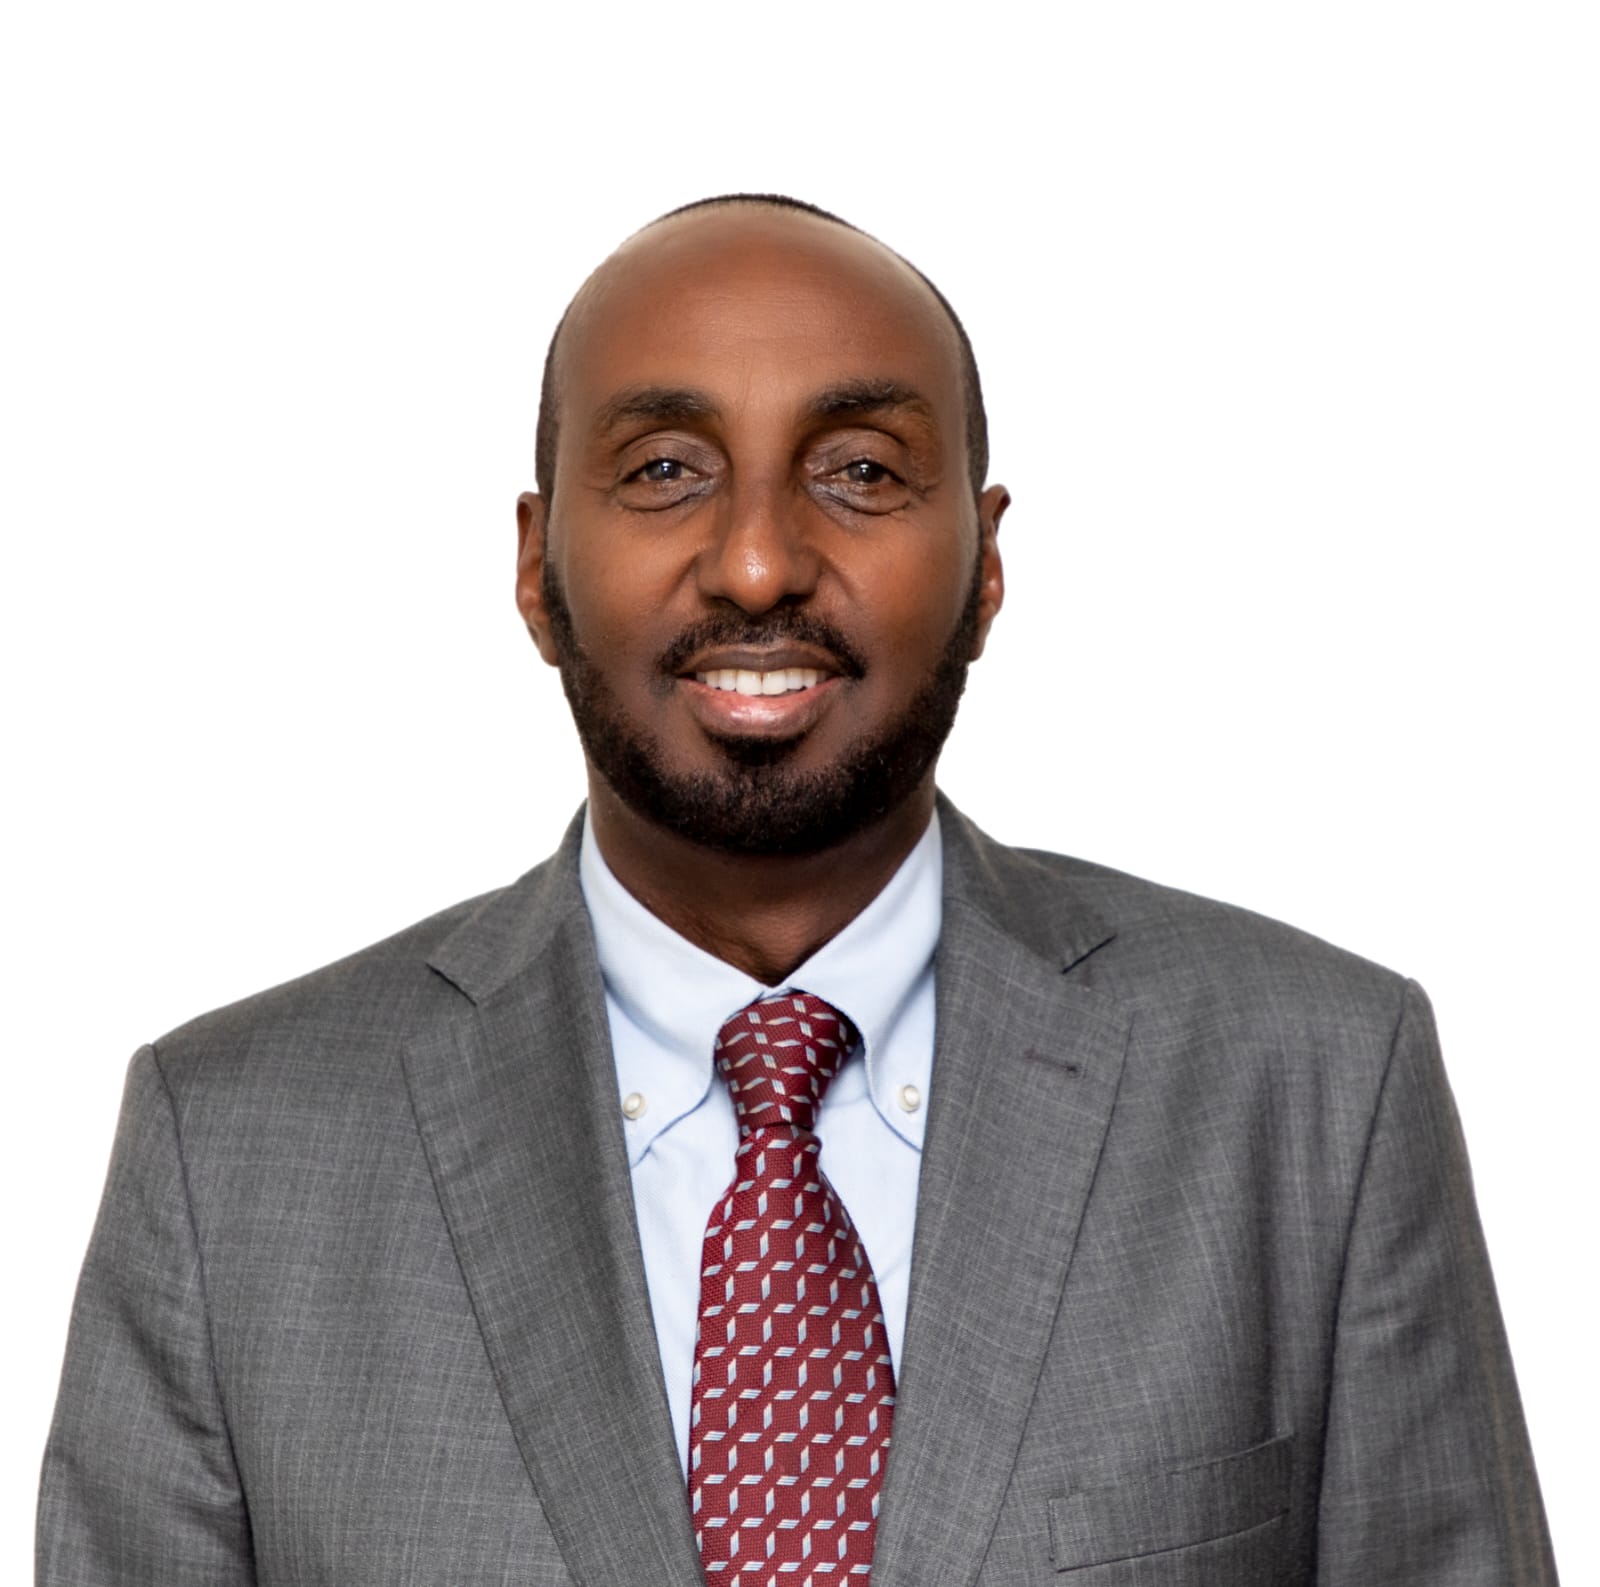 Mr. Abdi Mohamud Ahmed, MBS